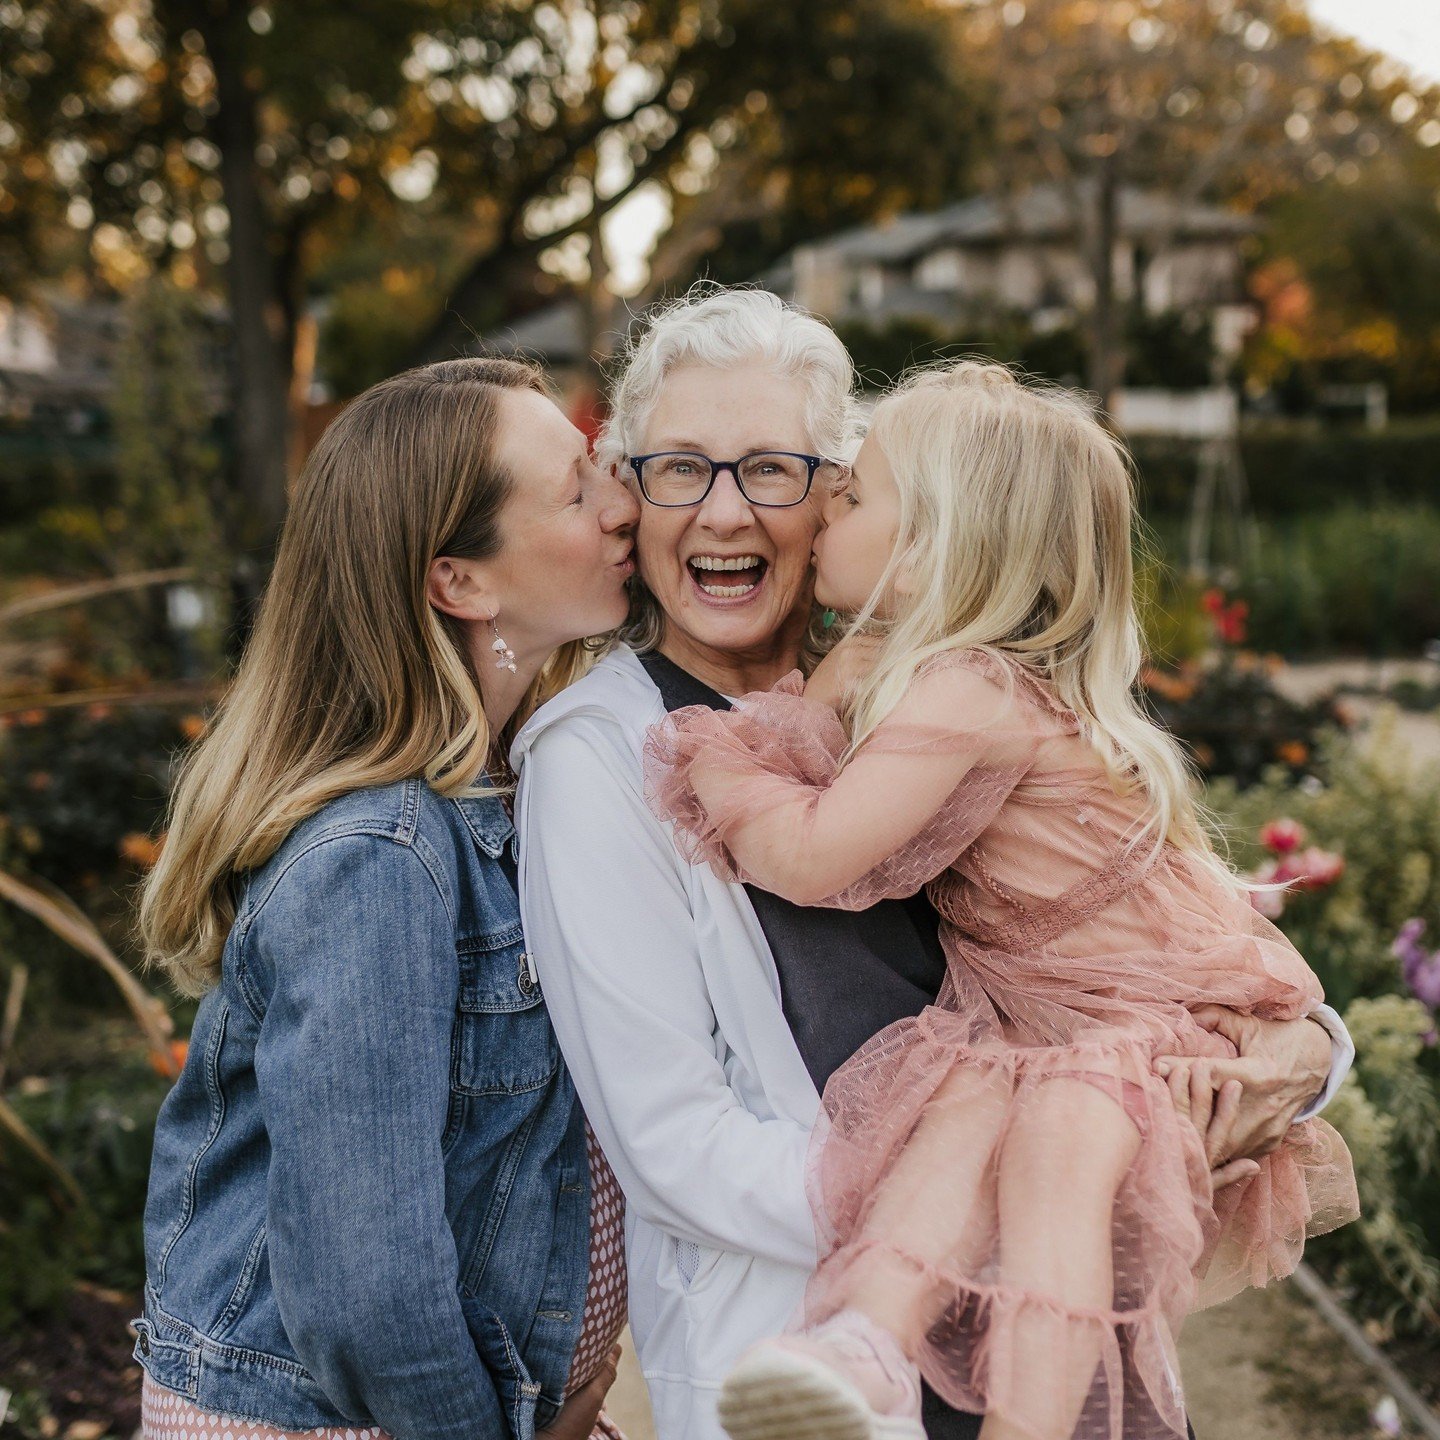 There is a magical bond between mom and daughters!!! Three generations are sharing all the love 💕⁠
.⁠
.⁠
.⁠
.⁠
.⁠
.⁠
.⁠
#bayarea #bayareamoms #bayareakids #bayareafamilies #familyphotographer #bayareafamilyphotographer #sanjosefamilyphotographer #pa